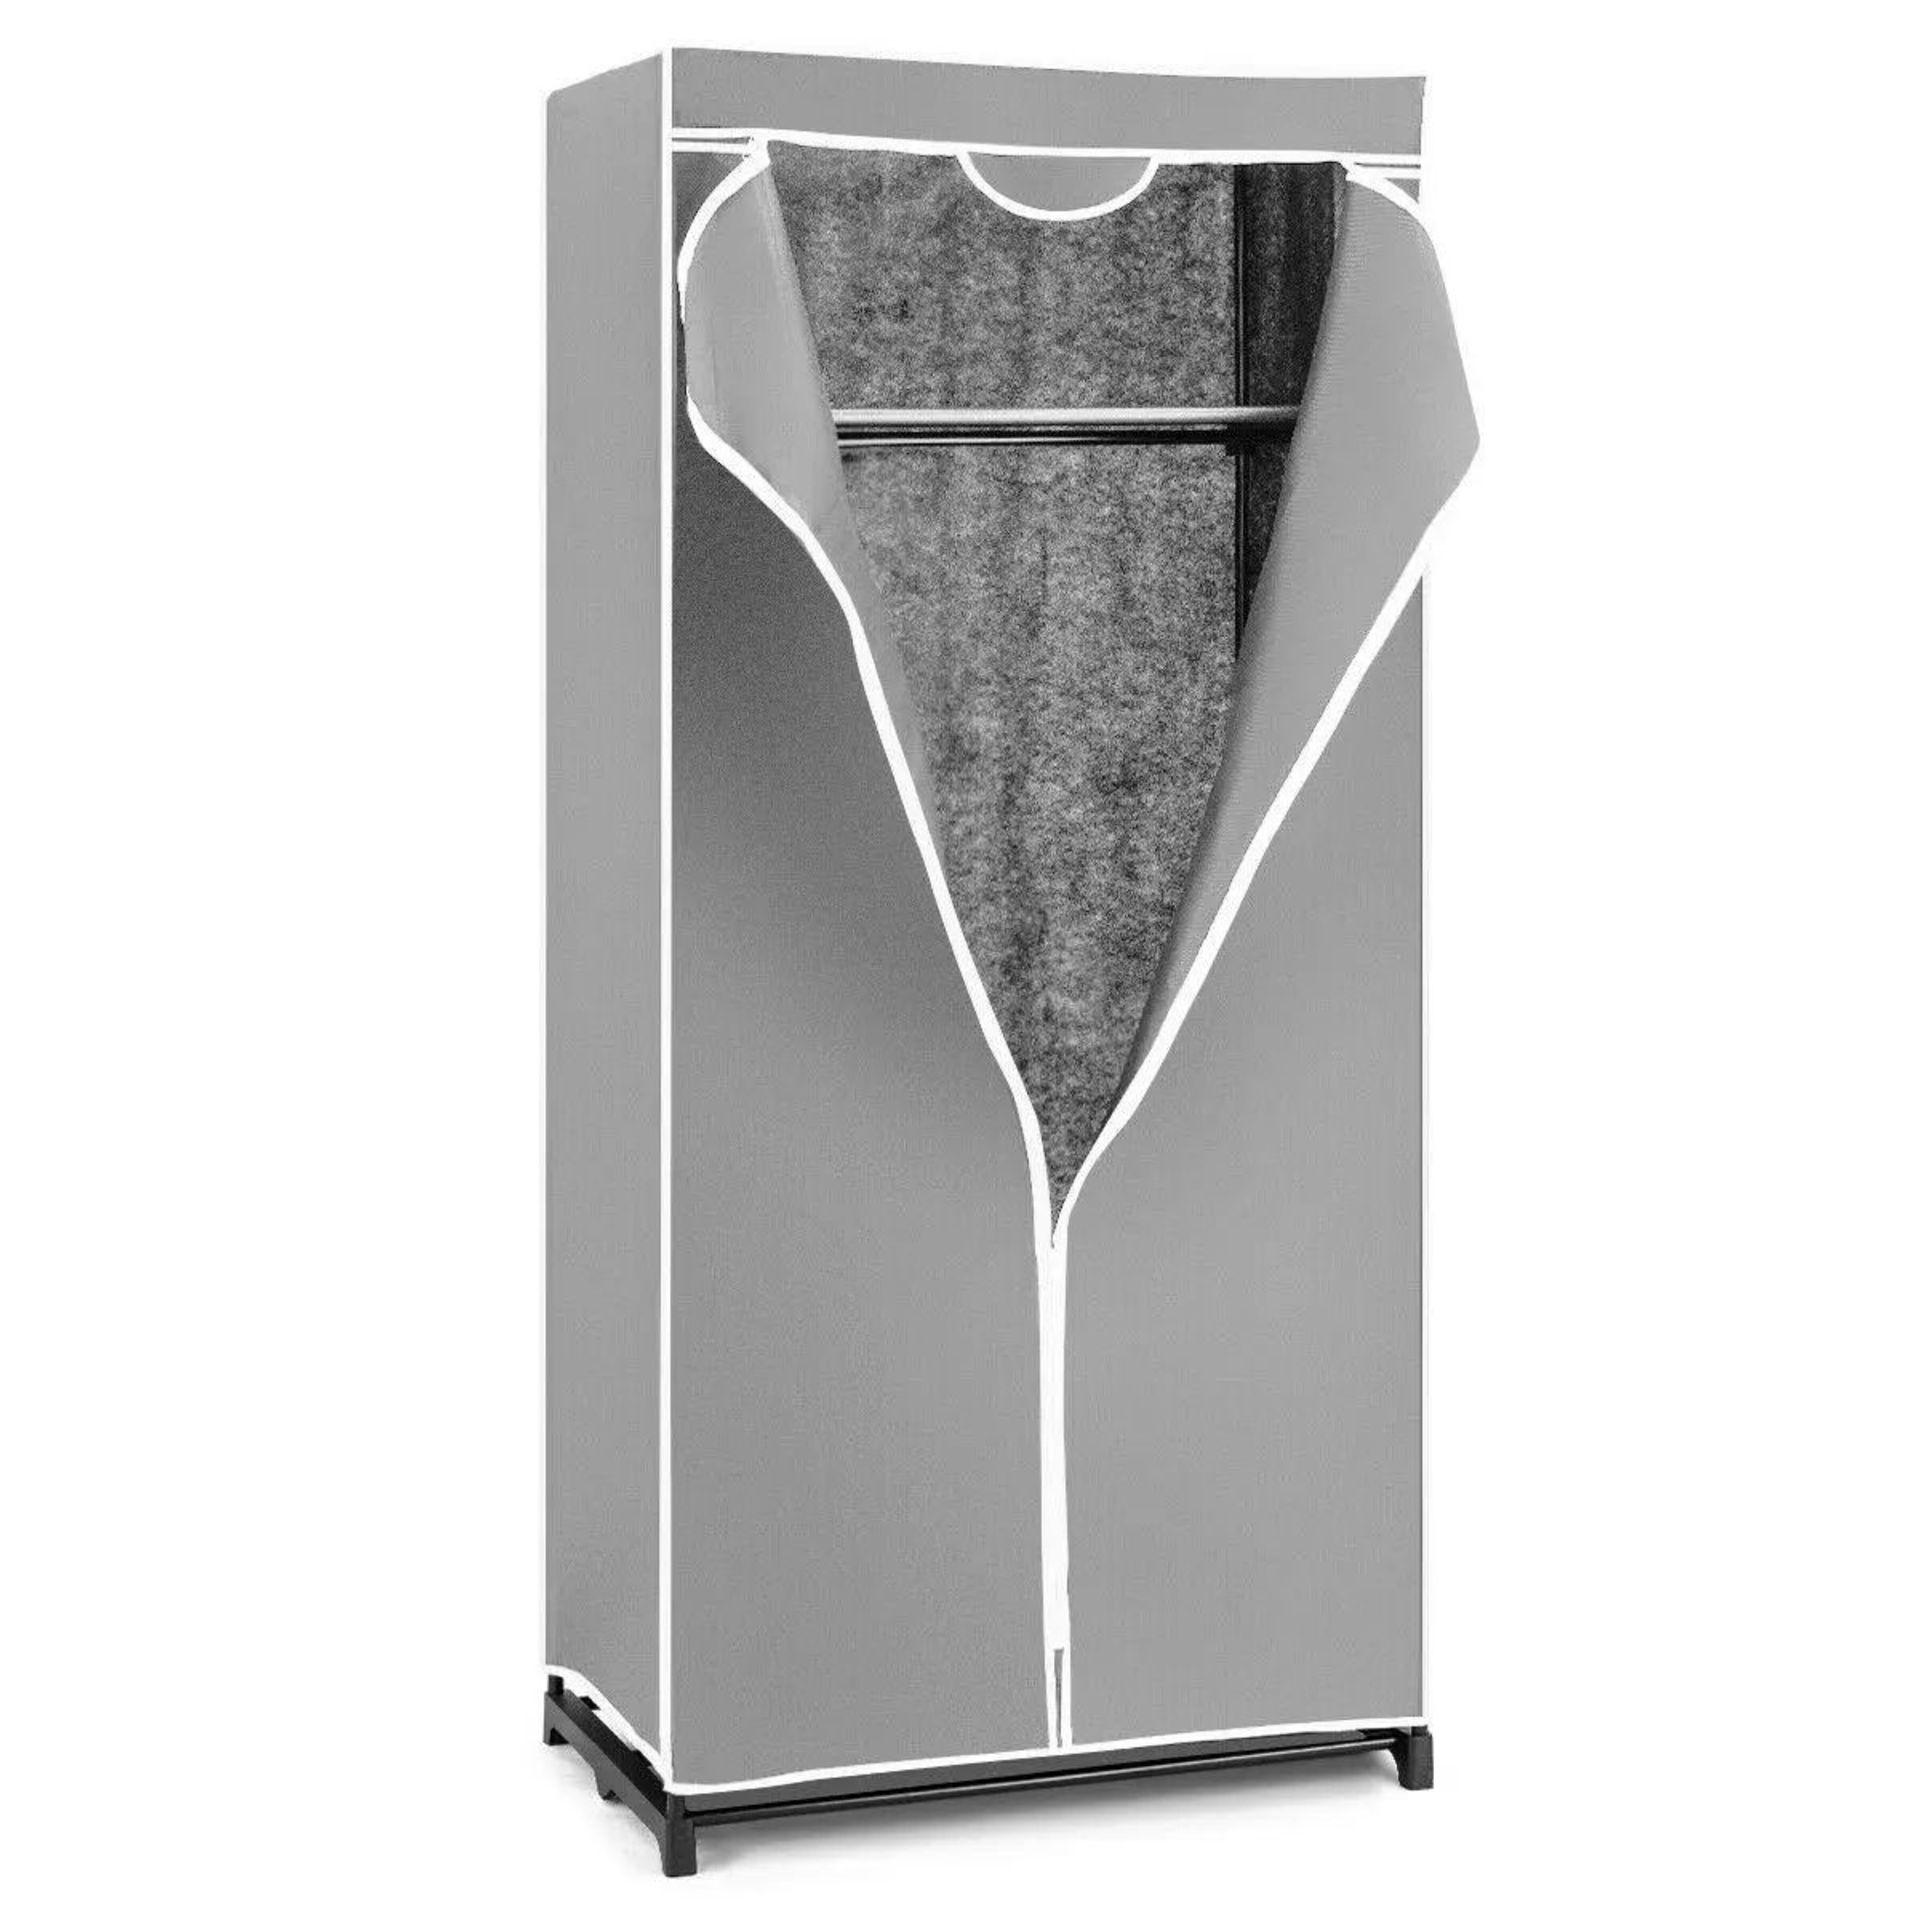 Double Canvas Wardrobe with Dust-proof Cover-Grey. - ER53. Need extra wardrobe space? This double